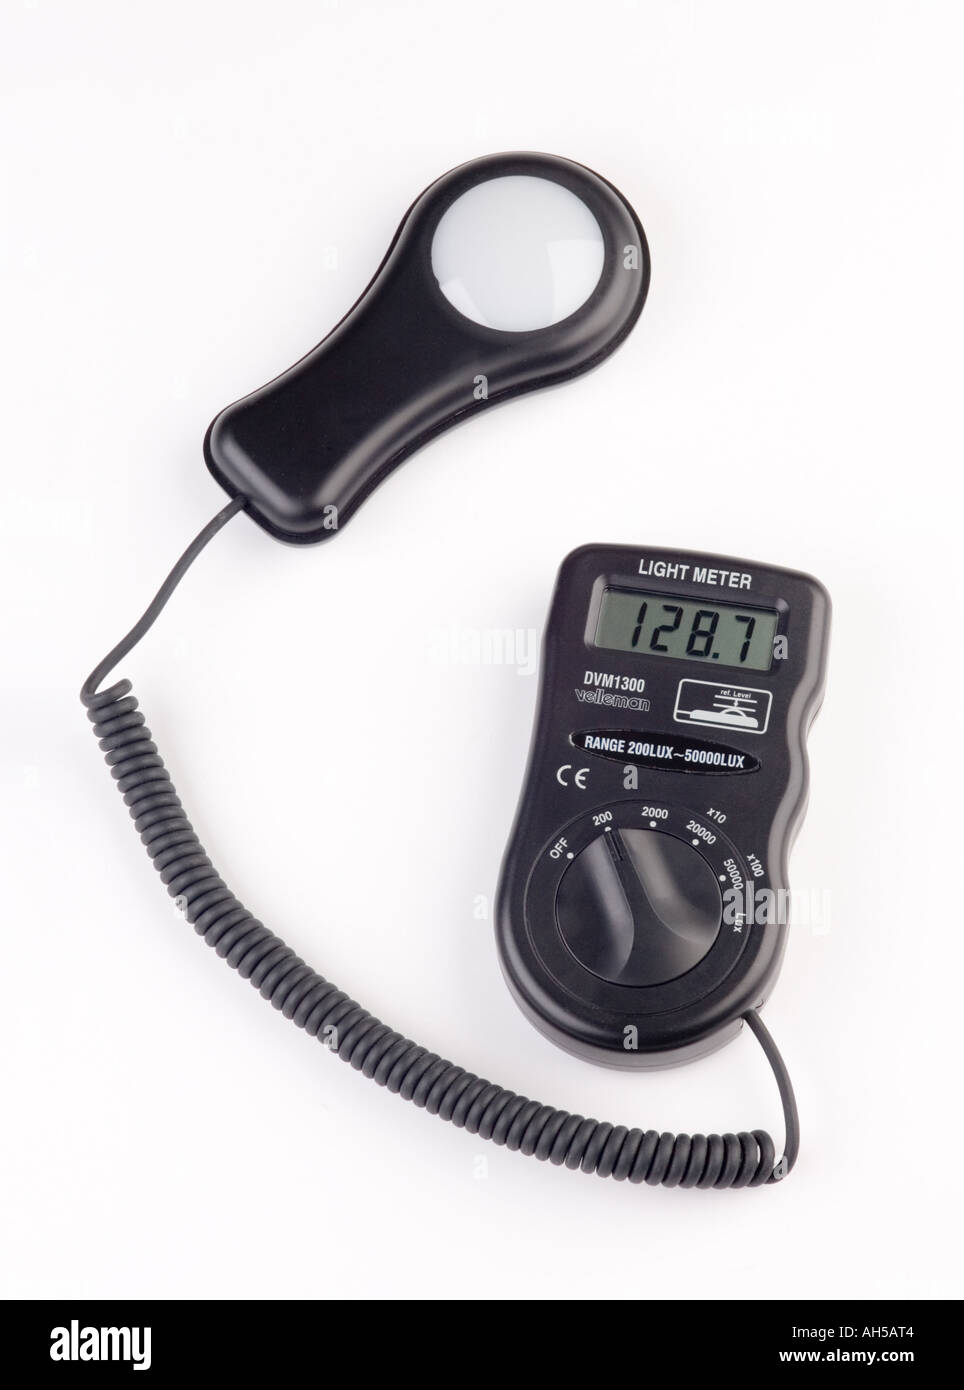 a digital light meter for measuring ambient light, often used for checking lighting in work and office rooms Stock Photo